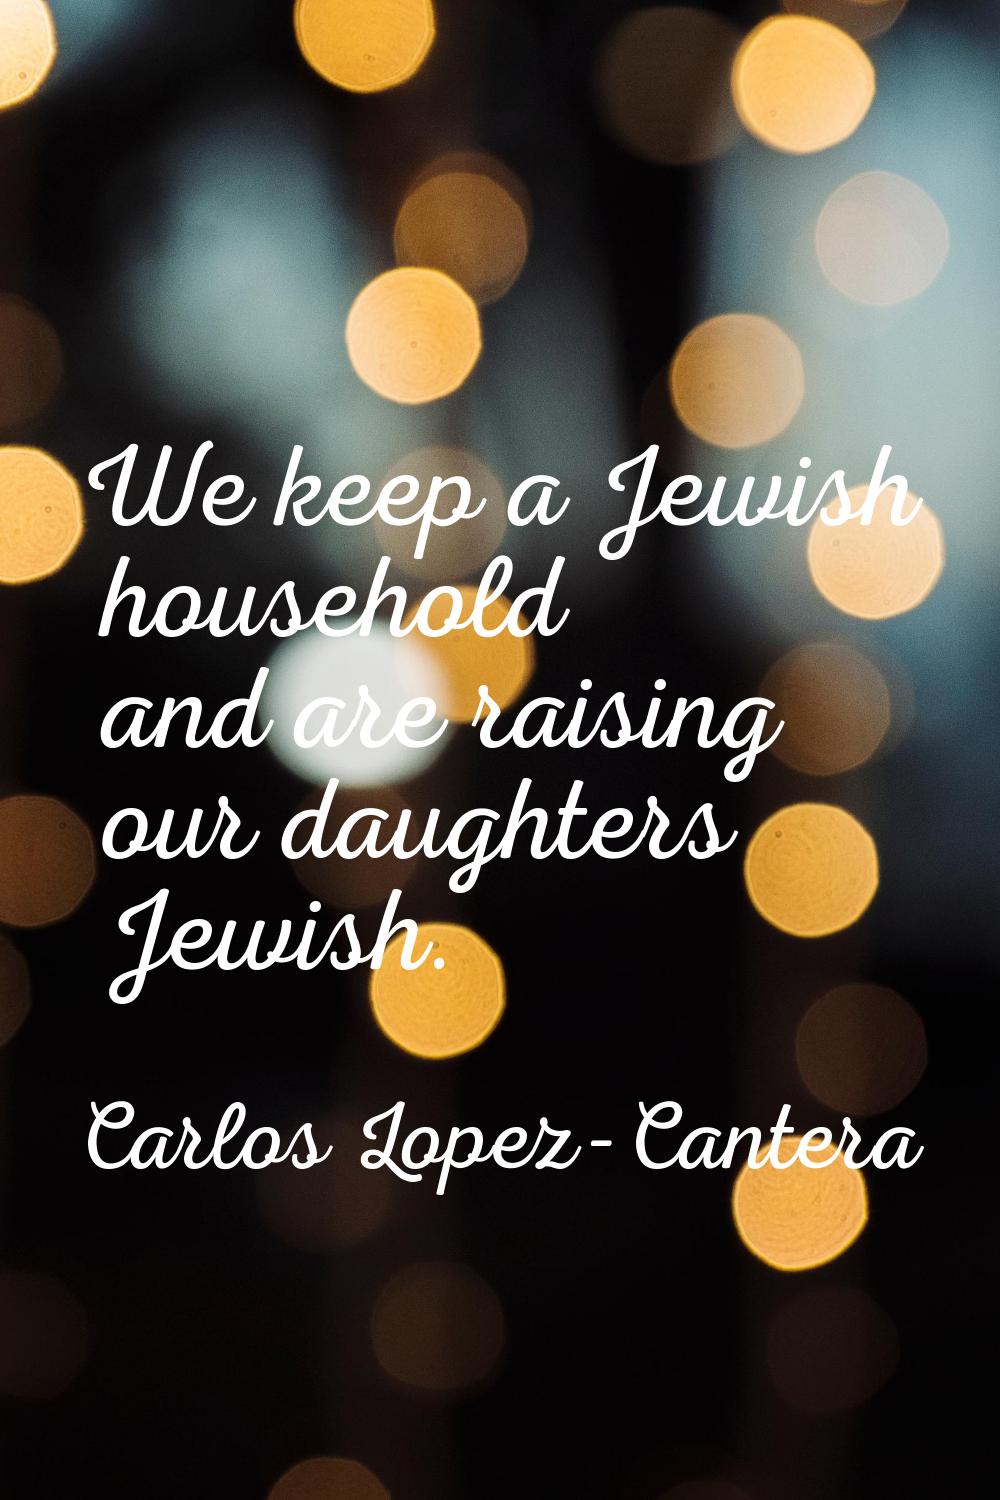 We keep a Jewish household and are raising our daughters Jewish.